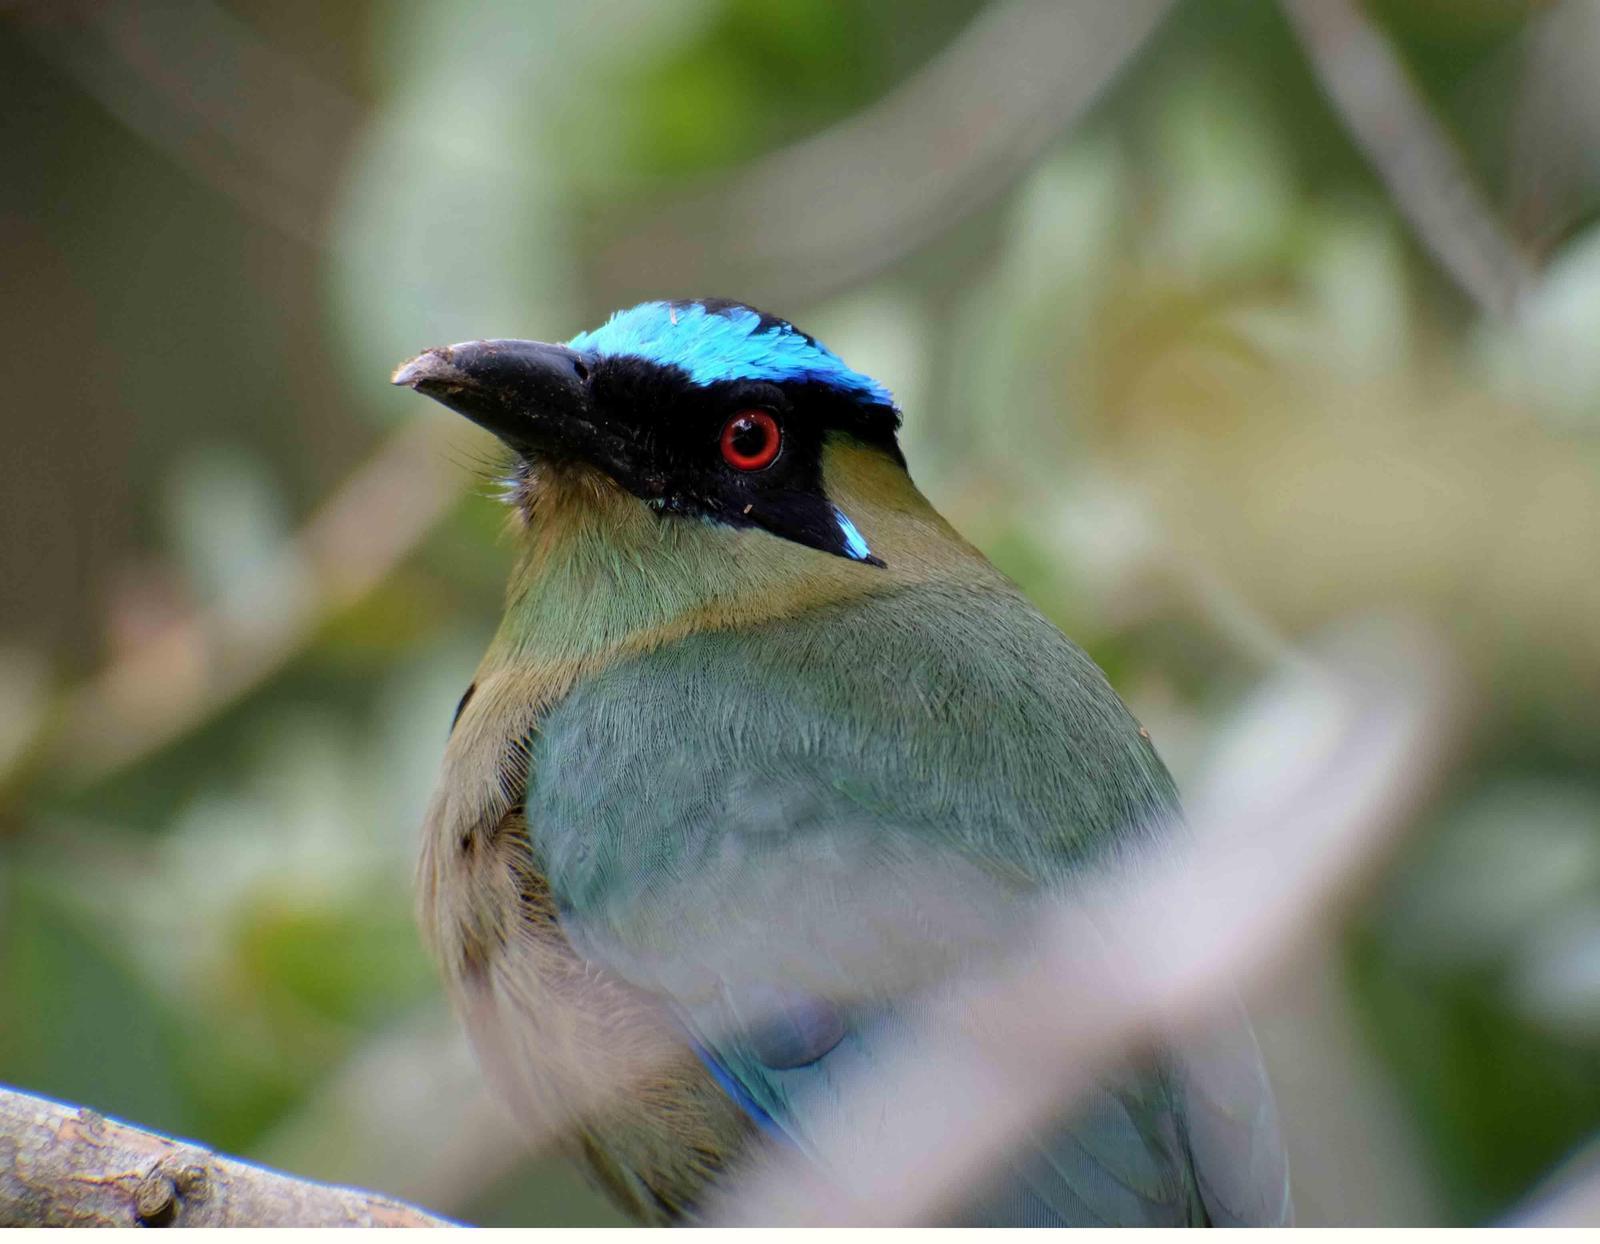 Andean Motmot Photo by Bob Hasenick